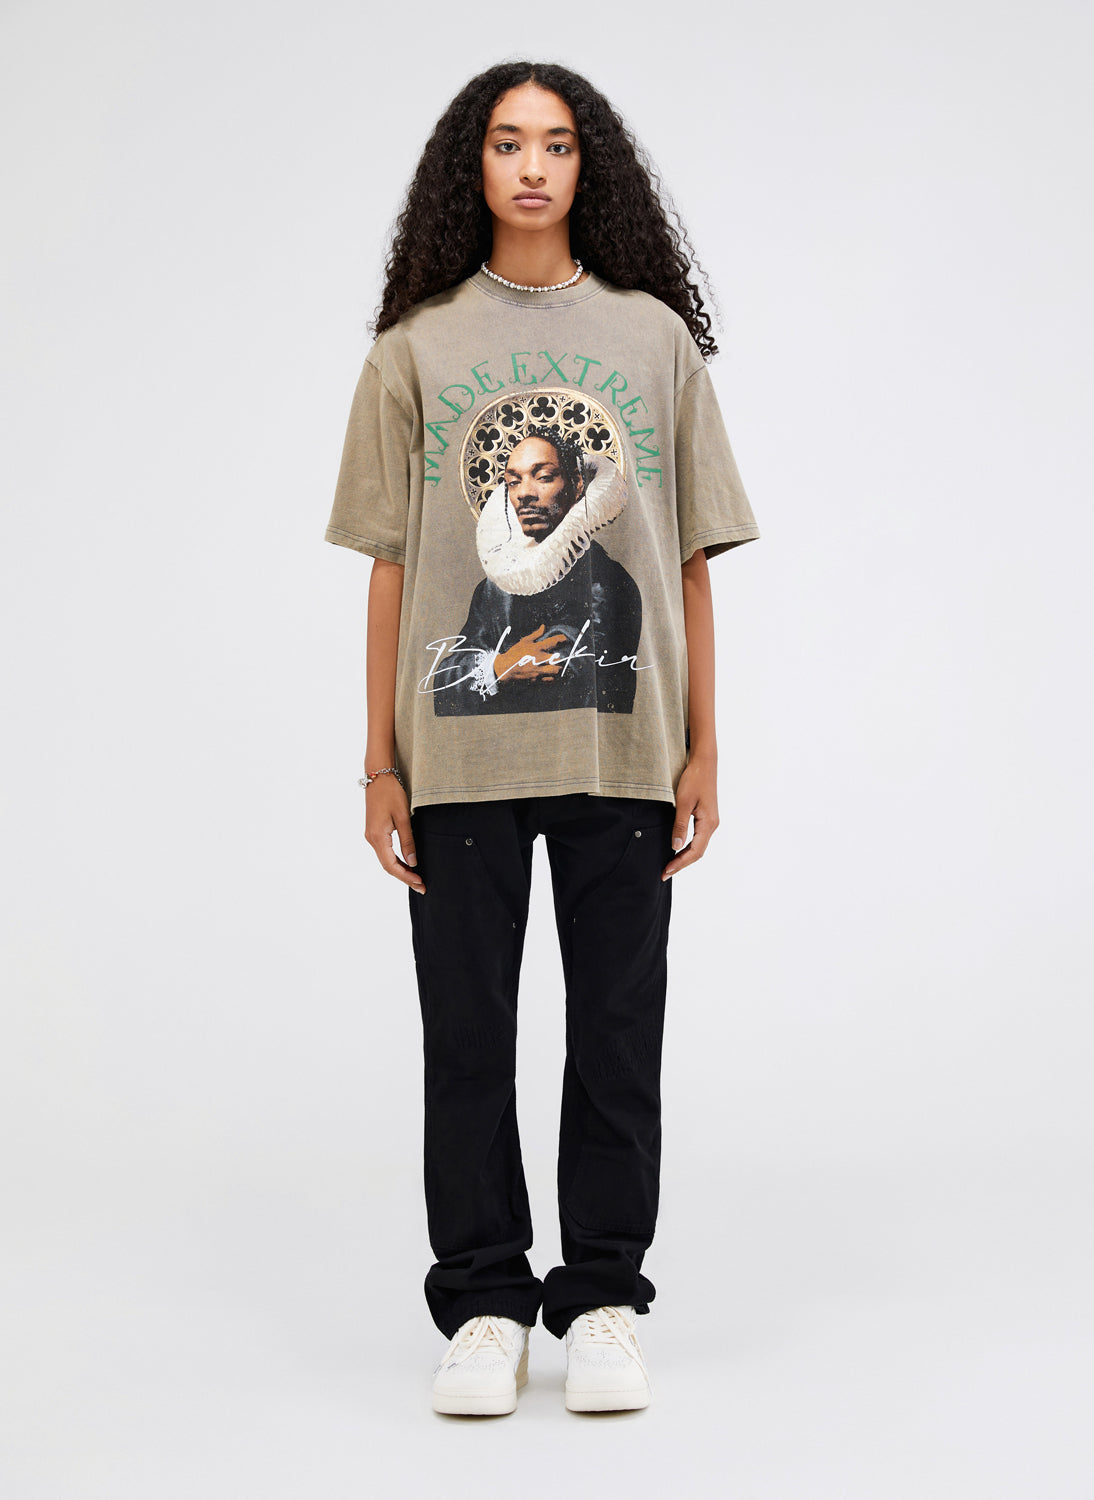 SNOOP LION SHINE FROM TRAGEDY T-SHIRT